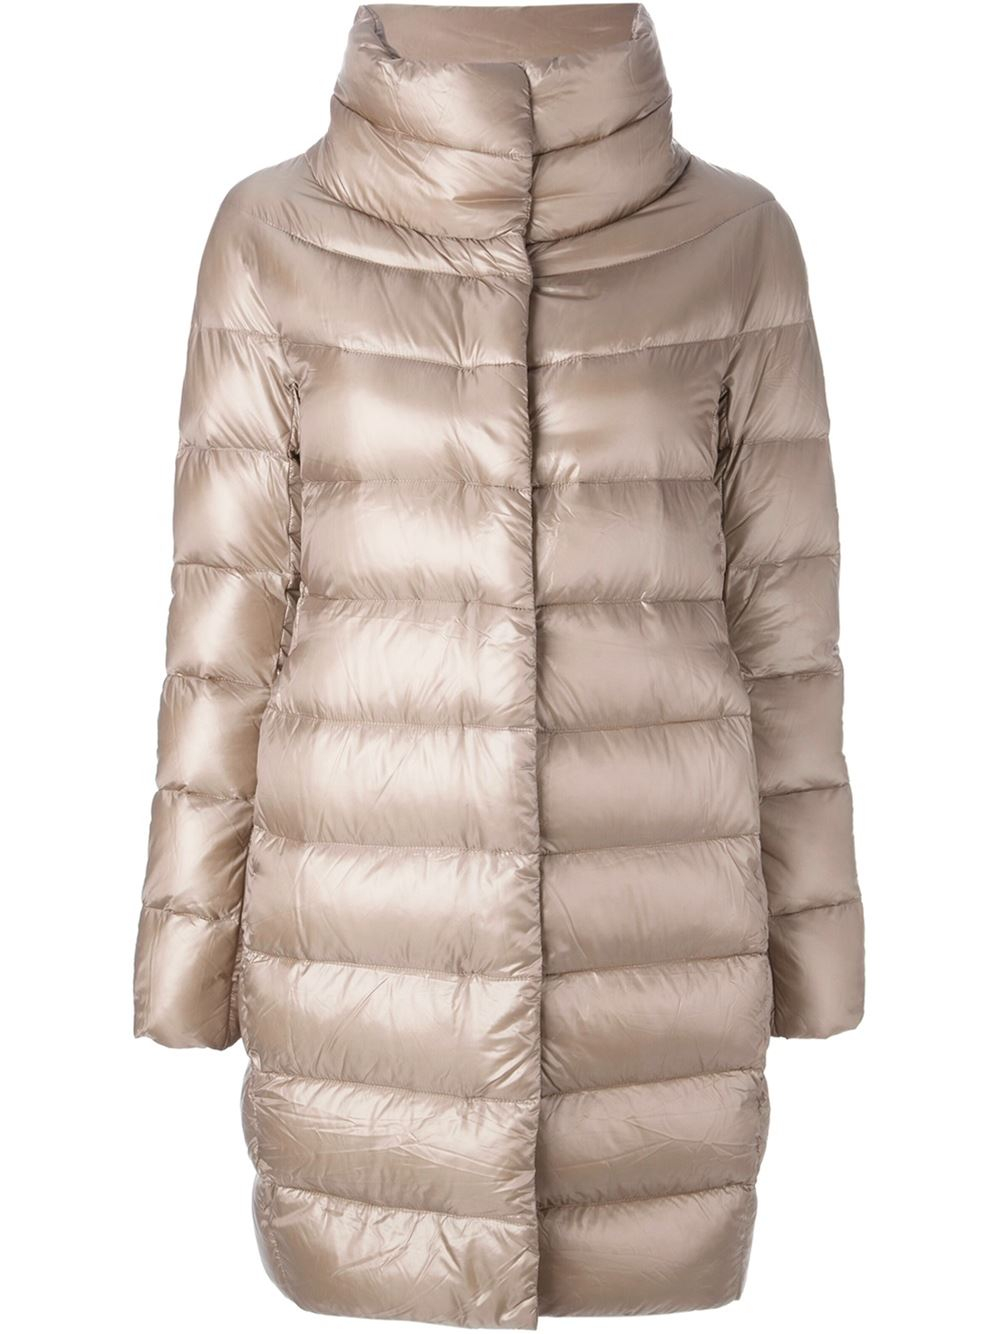 Herno Padded Coat in Natural - Lyst